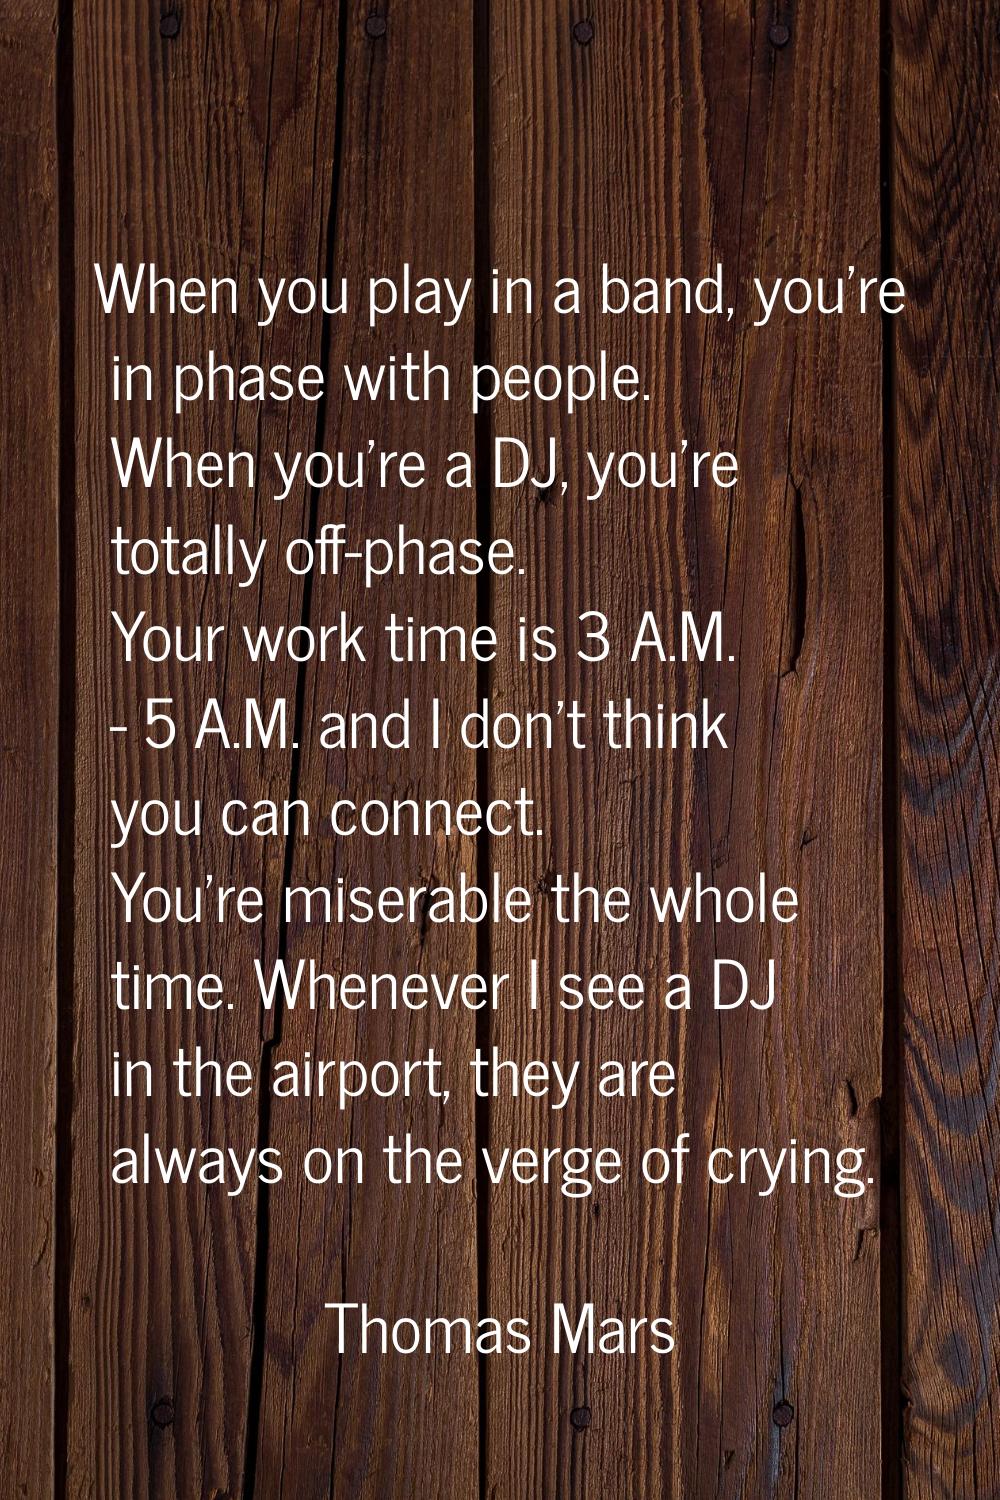 When you play in a band, you're in phase with people. When you're a DJ, you're totally off-phase. Y